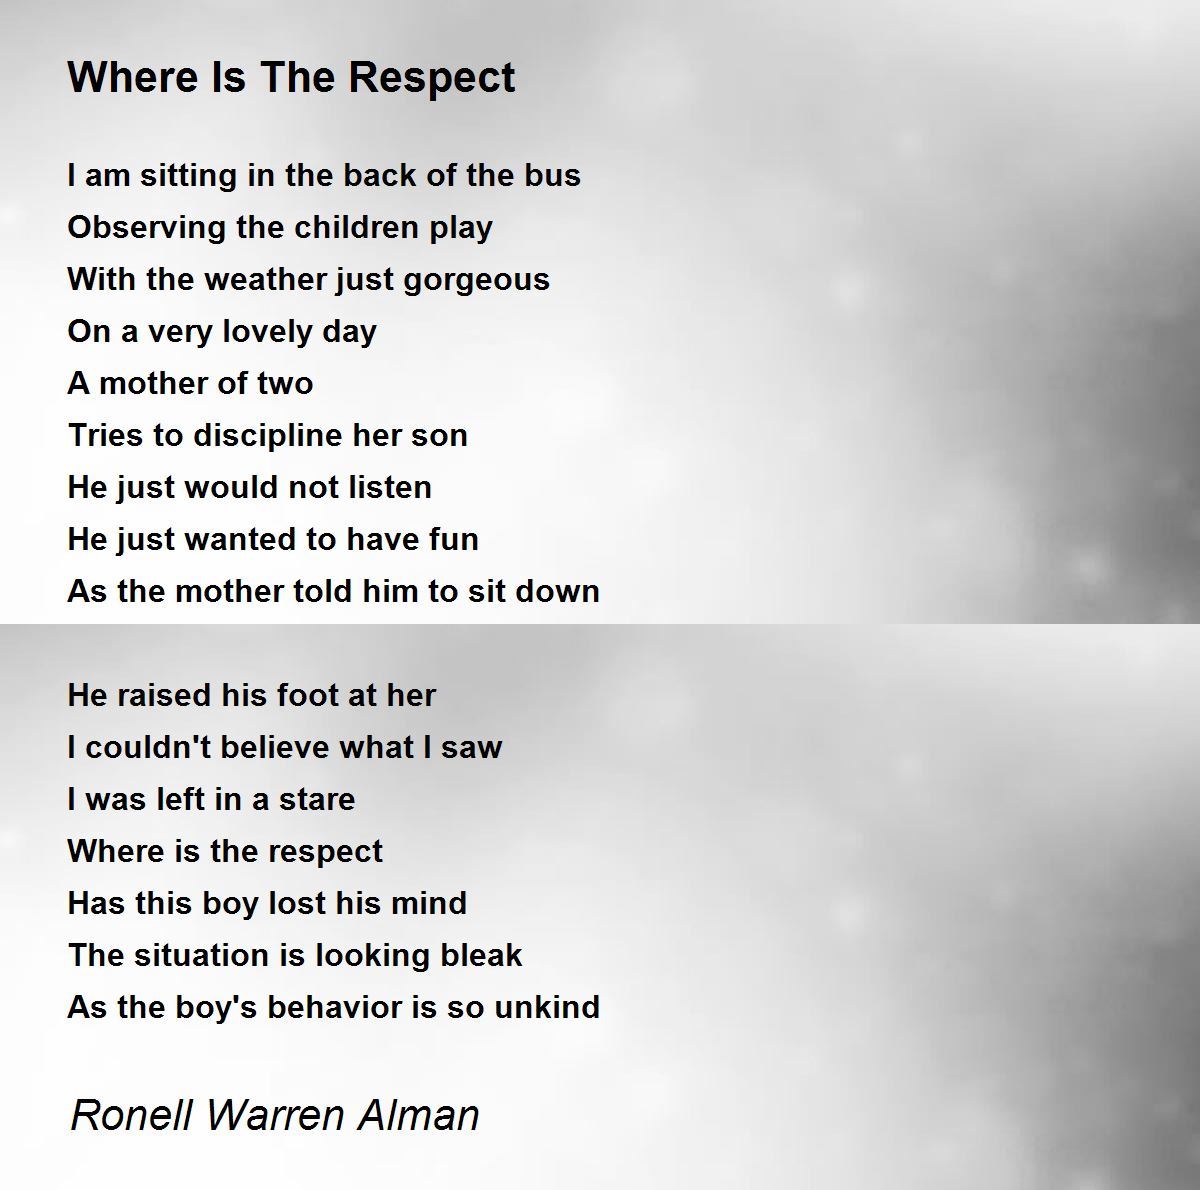 Where Is The Respect Poem by Ronell Warren Alman - Poem Hunter